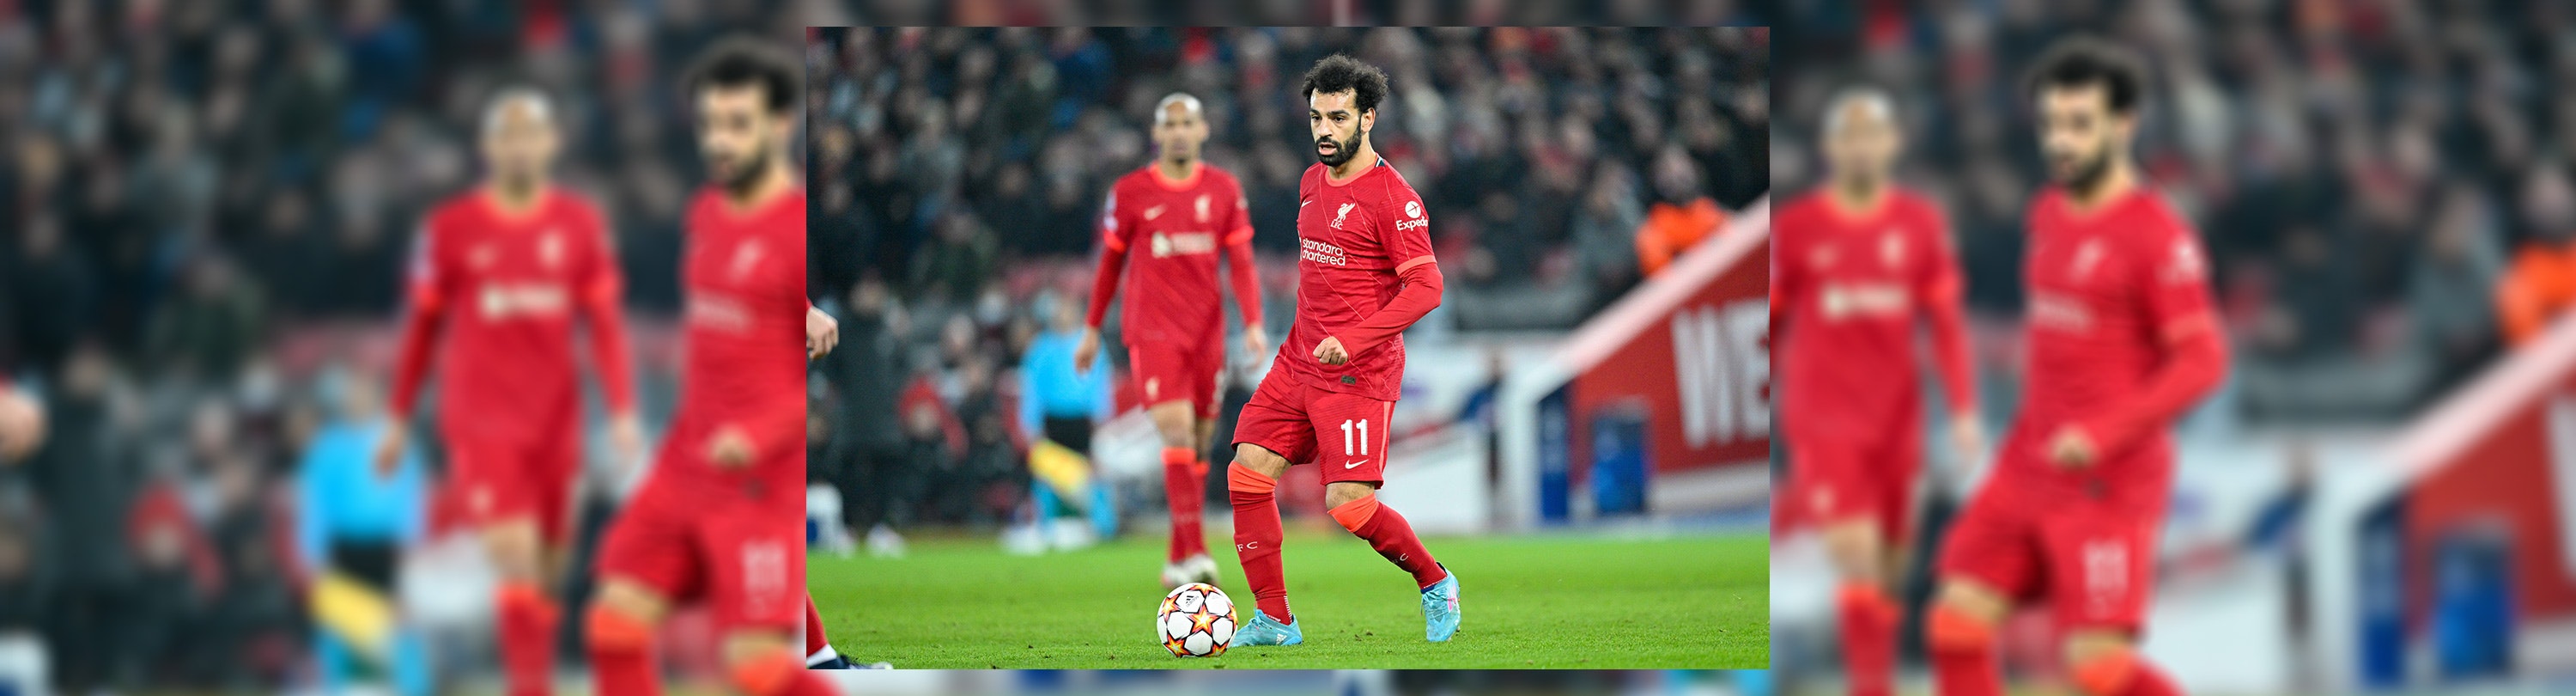 Mo Salah playing for Liverpool in their red livery